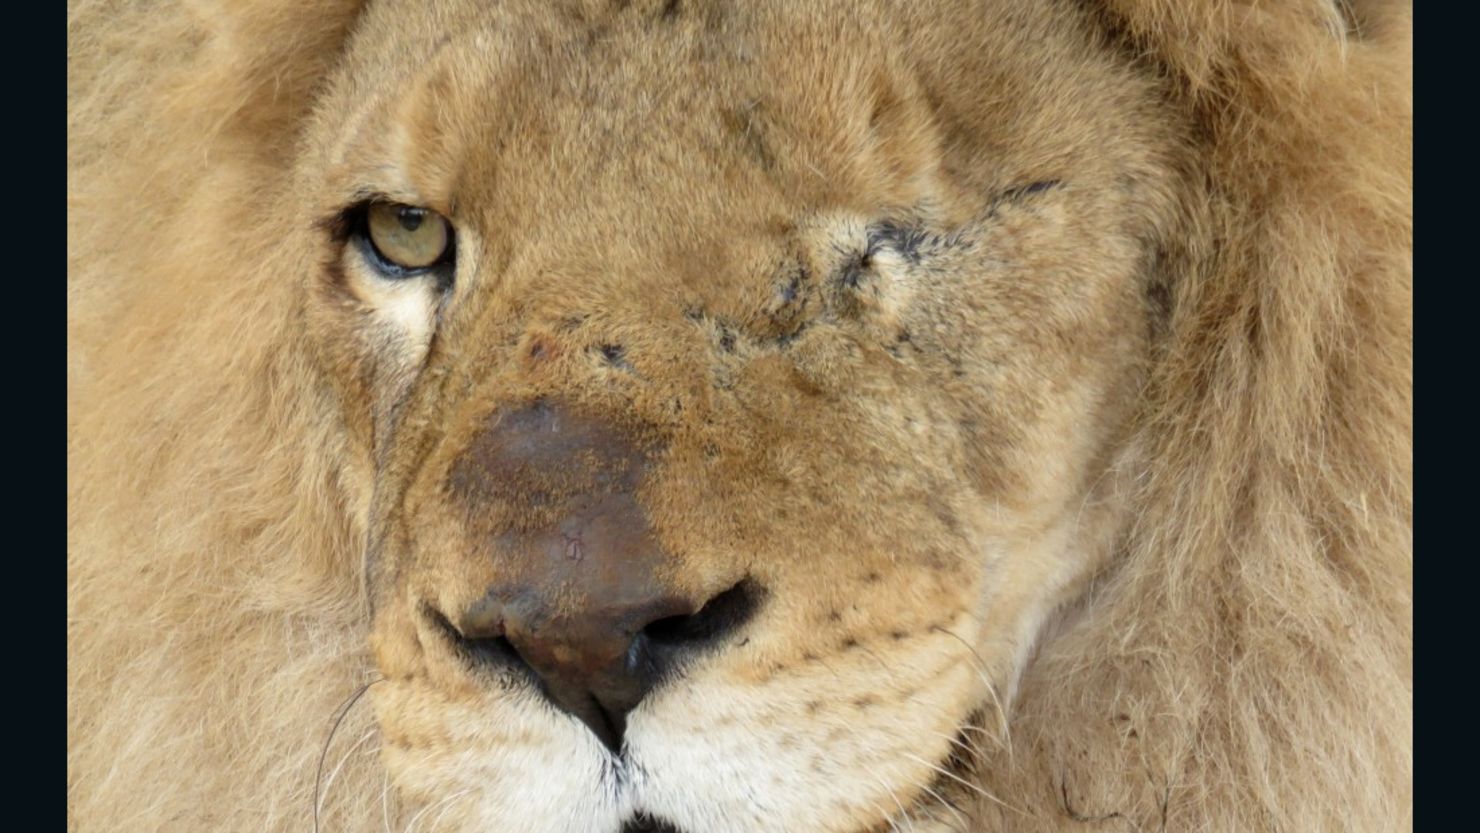 Ricardo is one of the 24 lions being rescued from a circus in Peru.